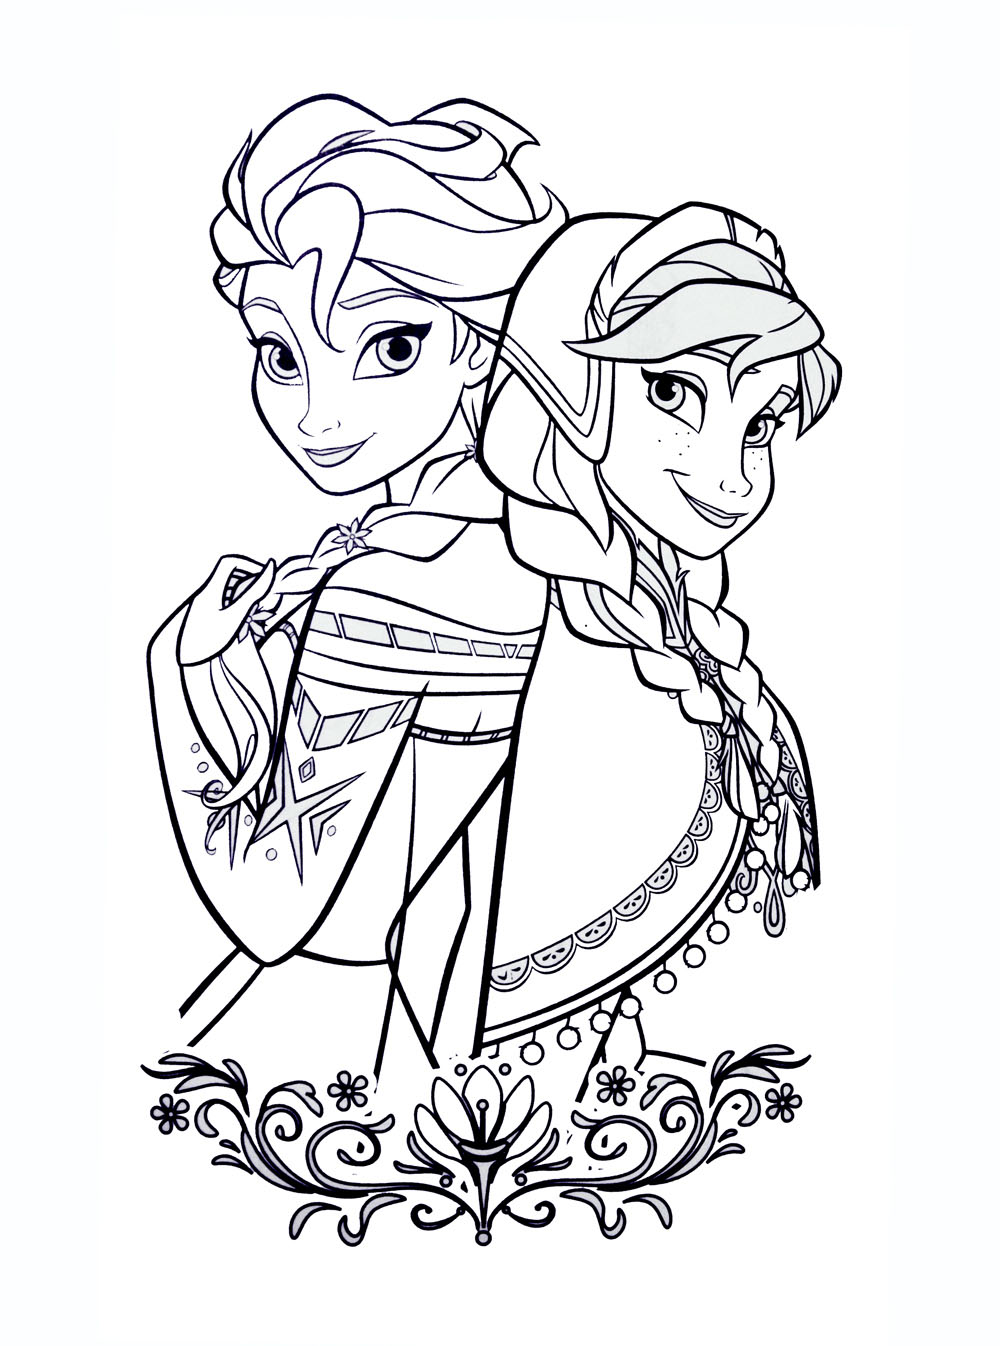 Frozen free to color for kids